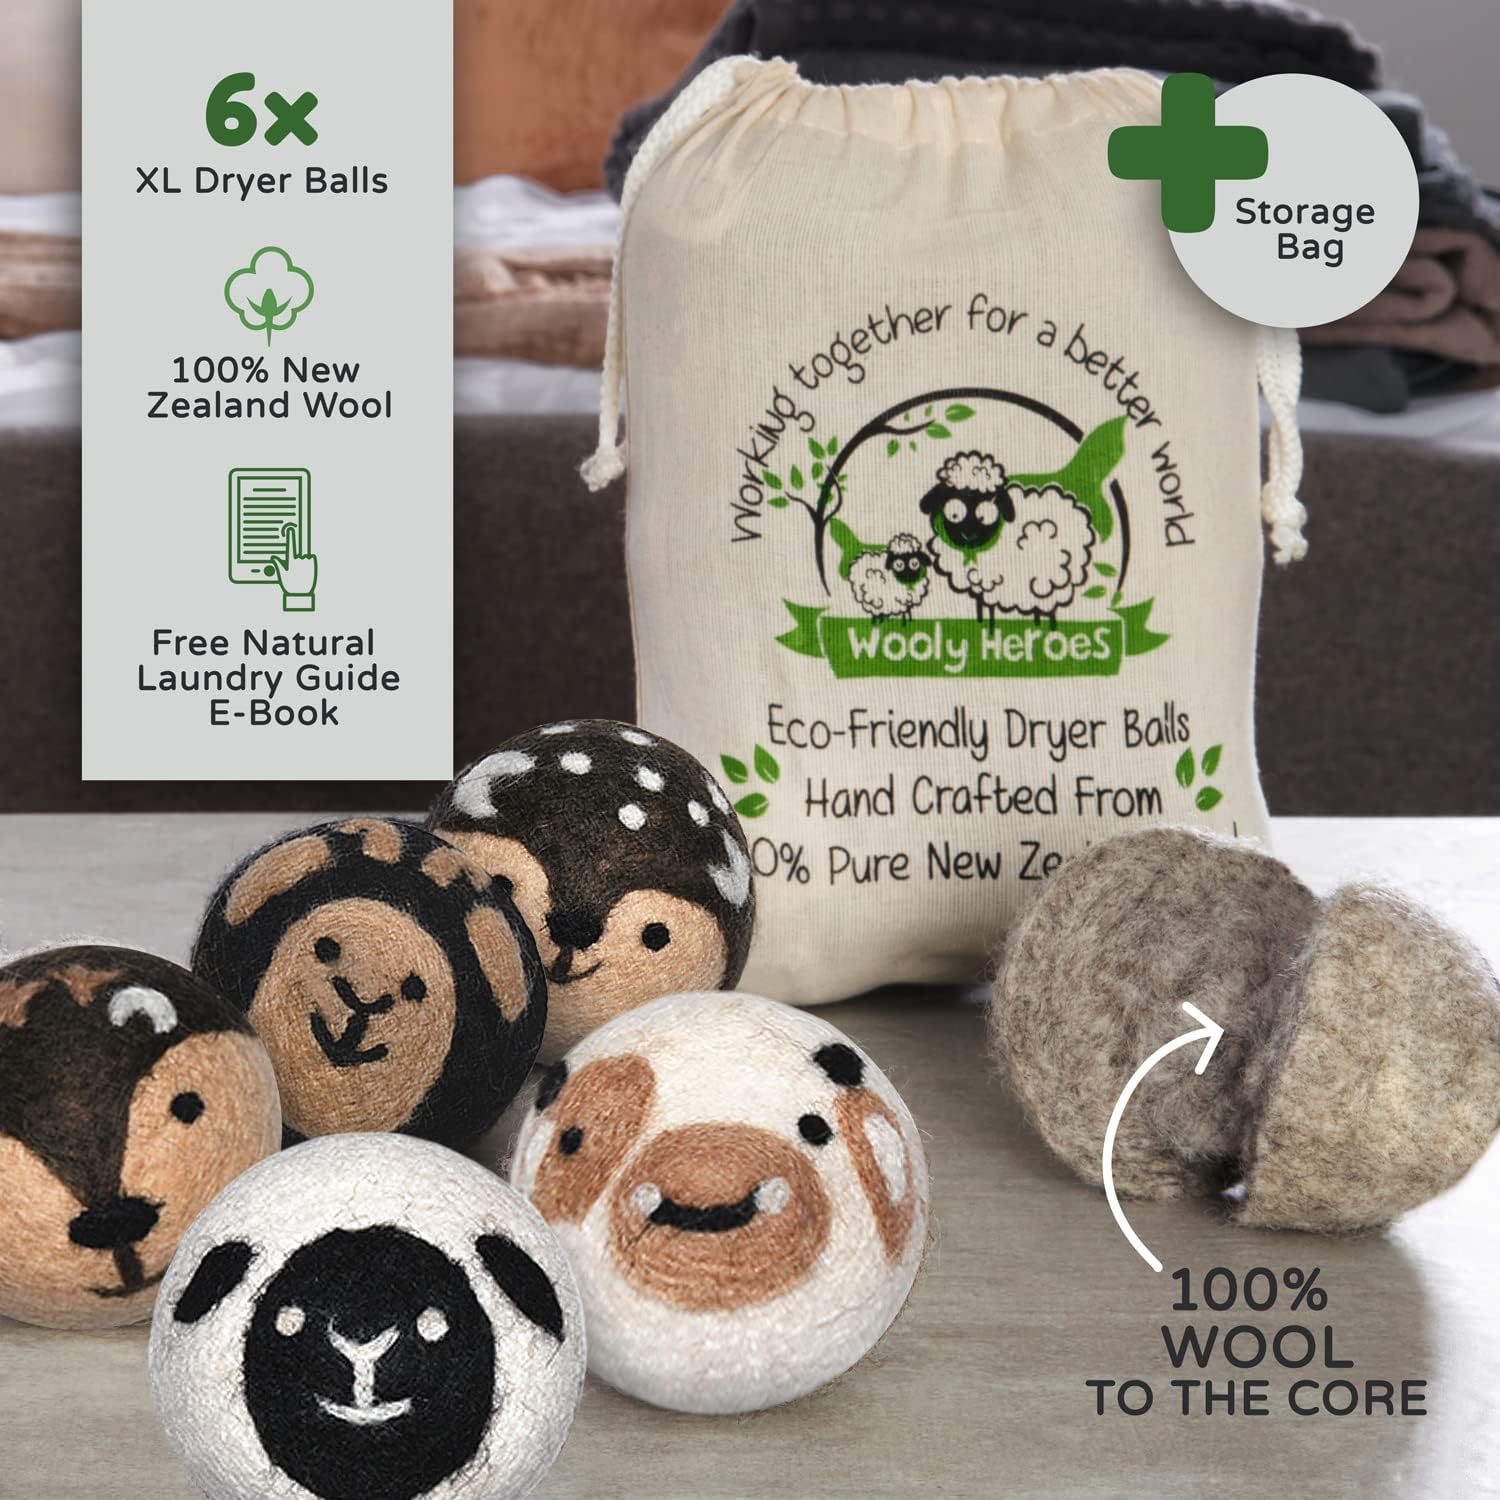 Wooly Heroes Wool Dryer Balls – Organic Eco Friendly Review